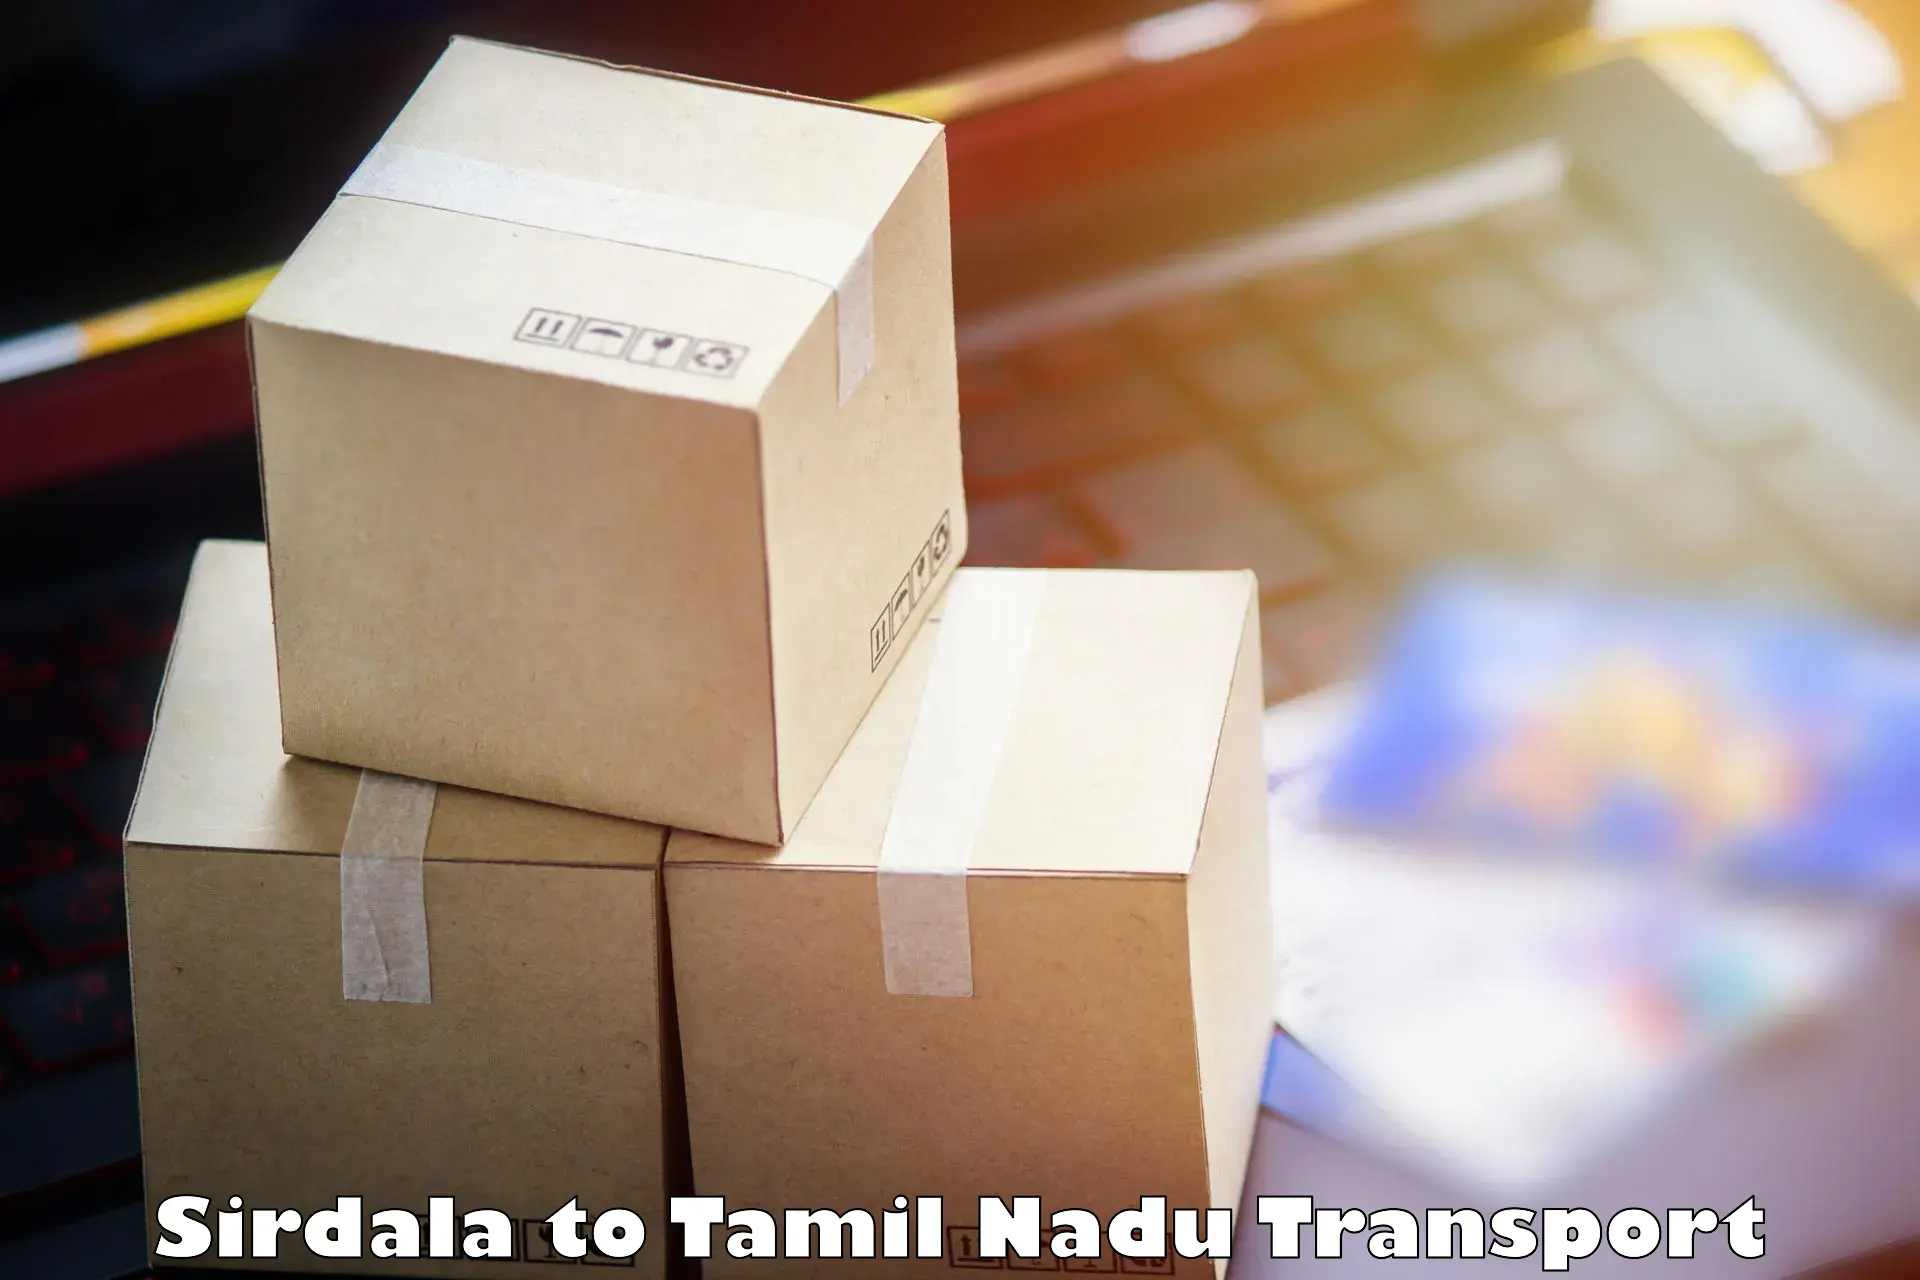 Goods delivery service Sirdala to Tamil Nadu